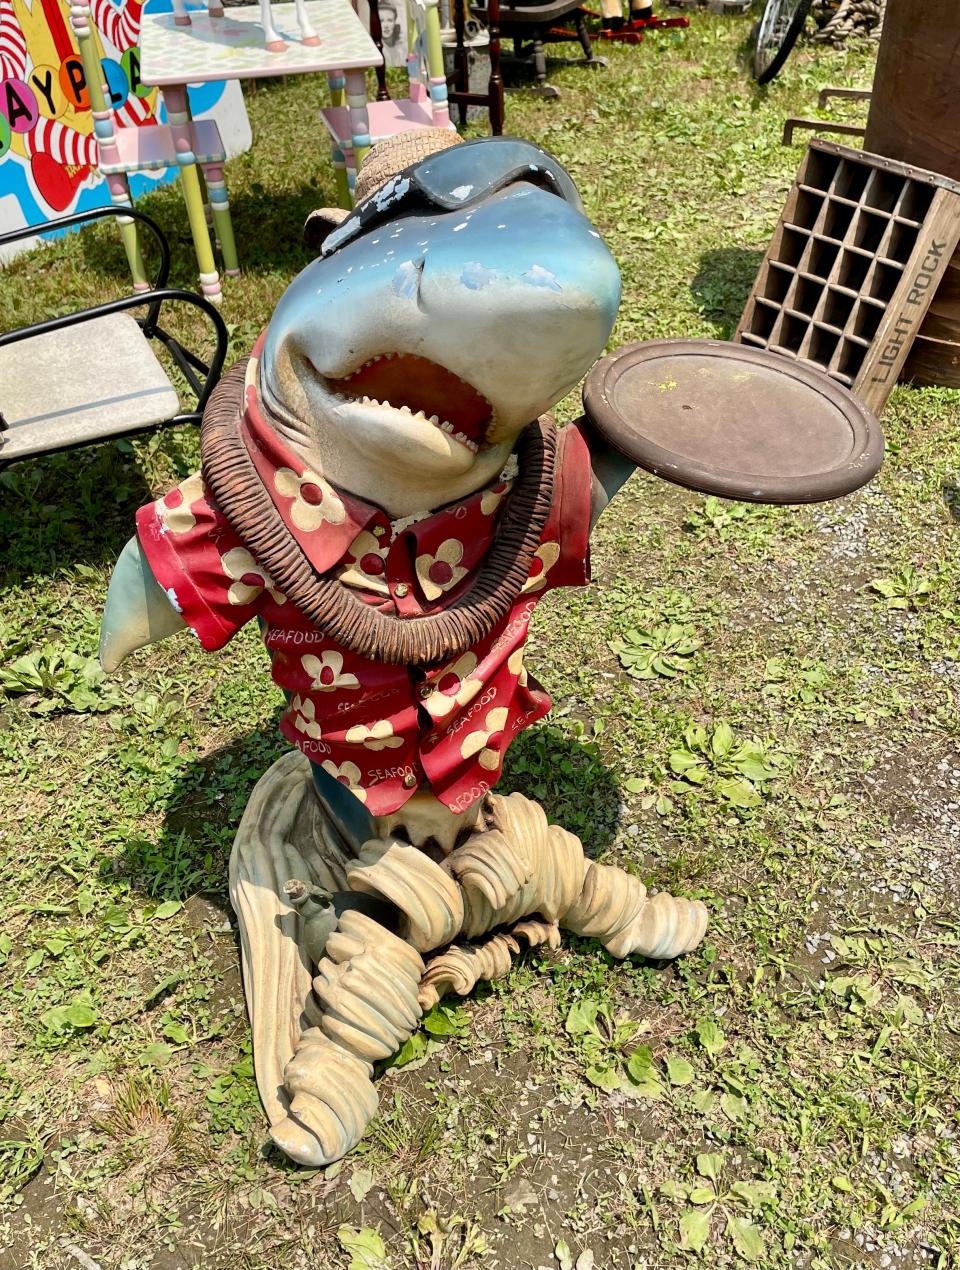 Shark butler statue from between the 1960s to 70s, sold at Lester's Booth in Quaker Acres. Going for $150